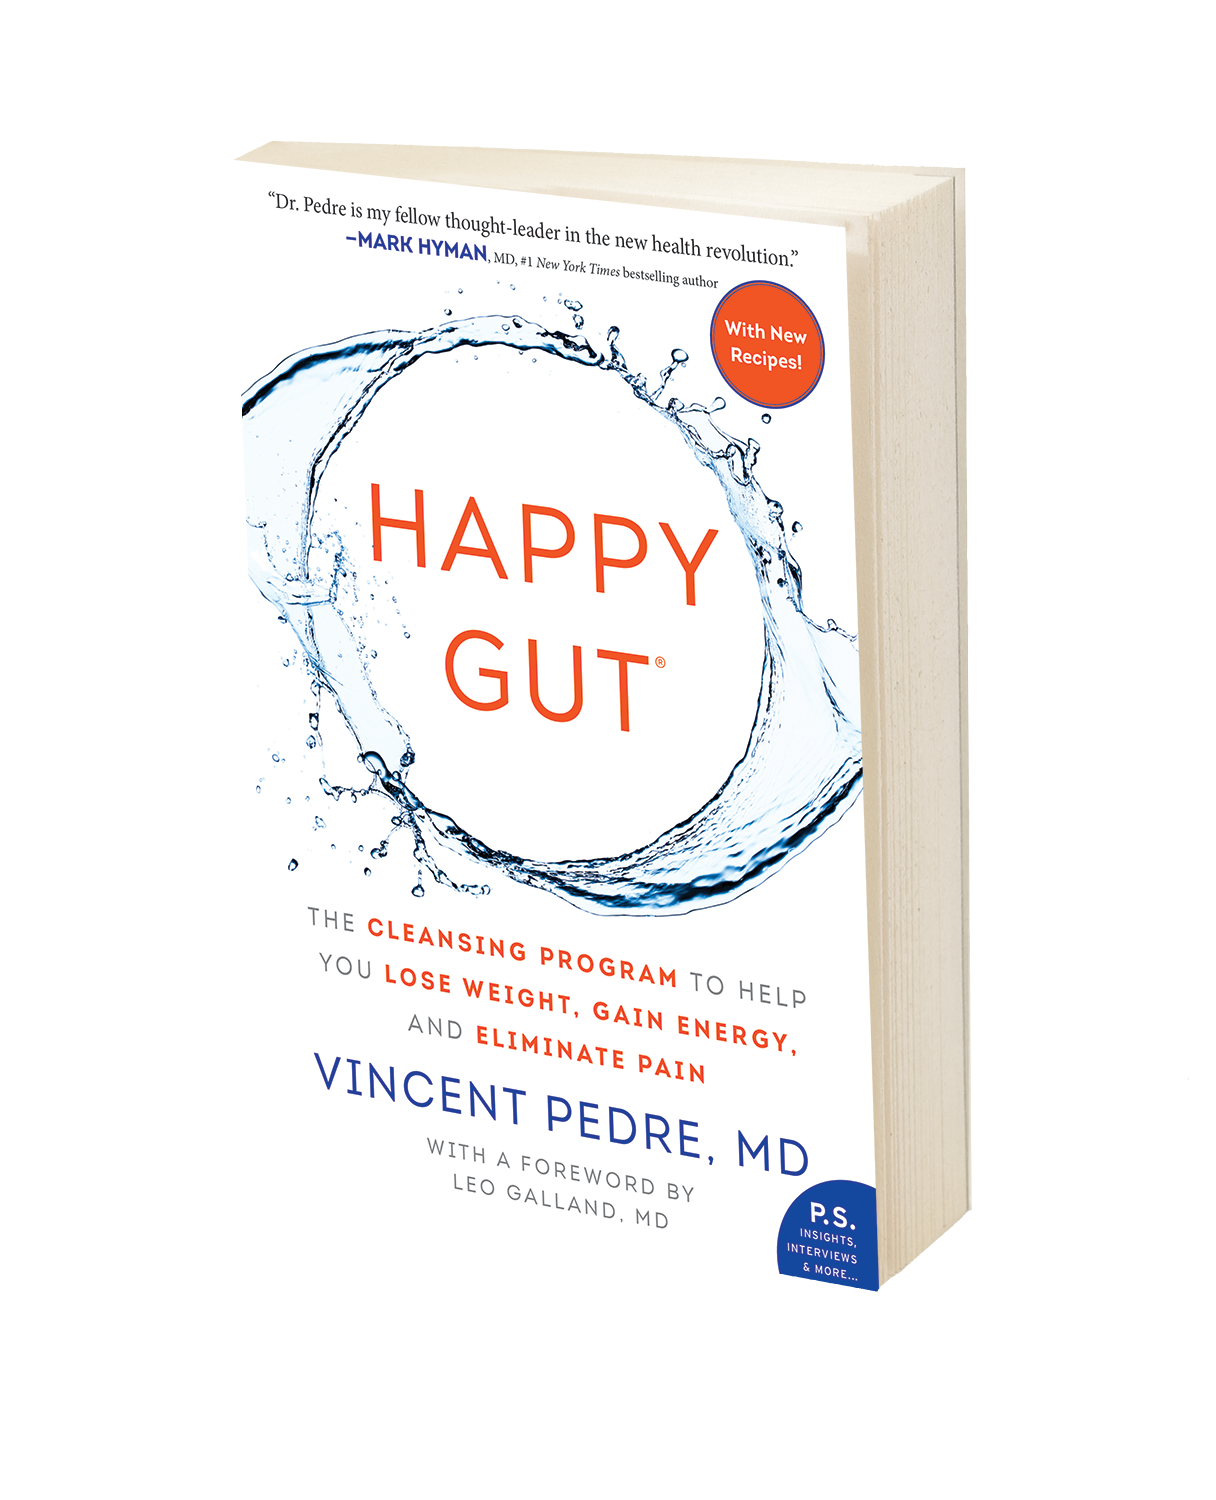 Copy of HAPPY GUT®:  The Cleansing Program to Help You Lose Weight, Gain Energy, and Eliminate Pain